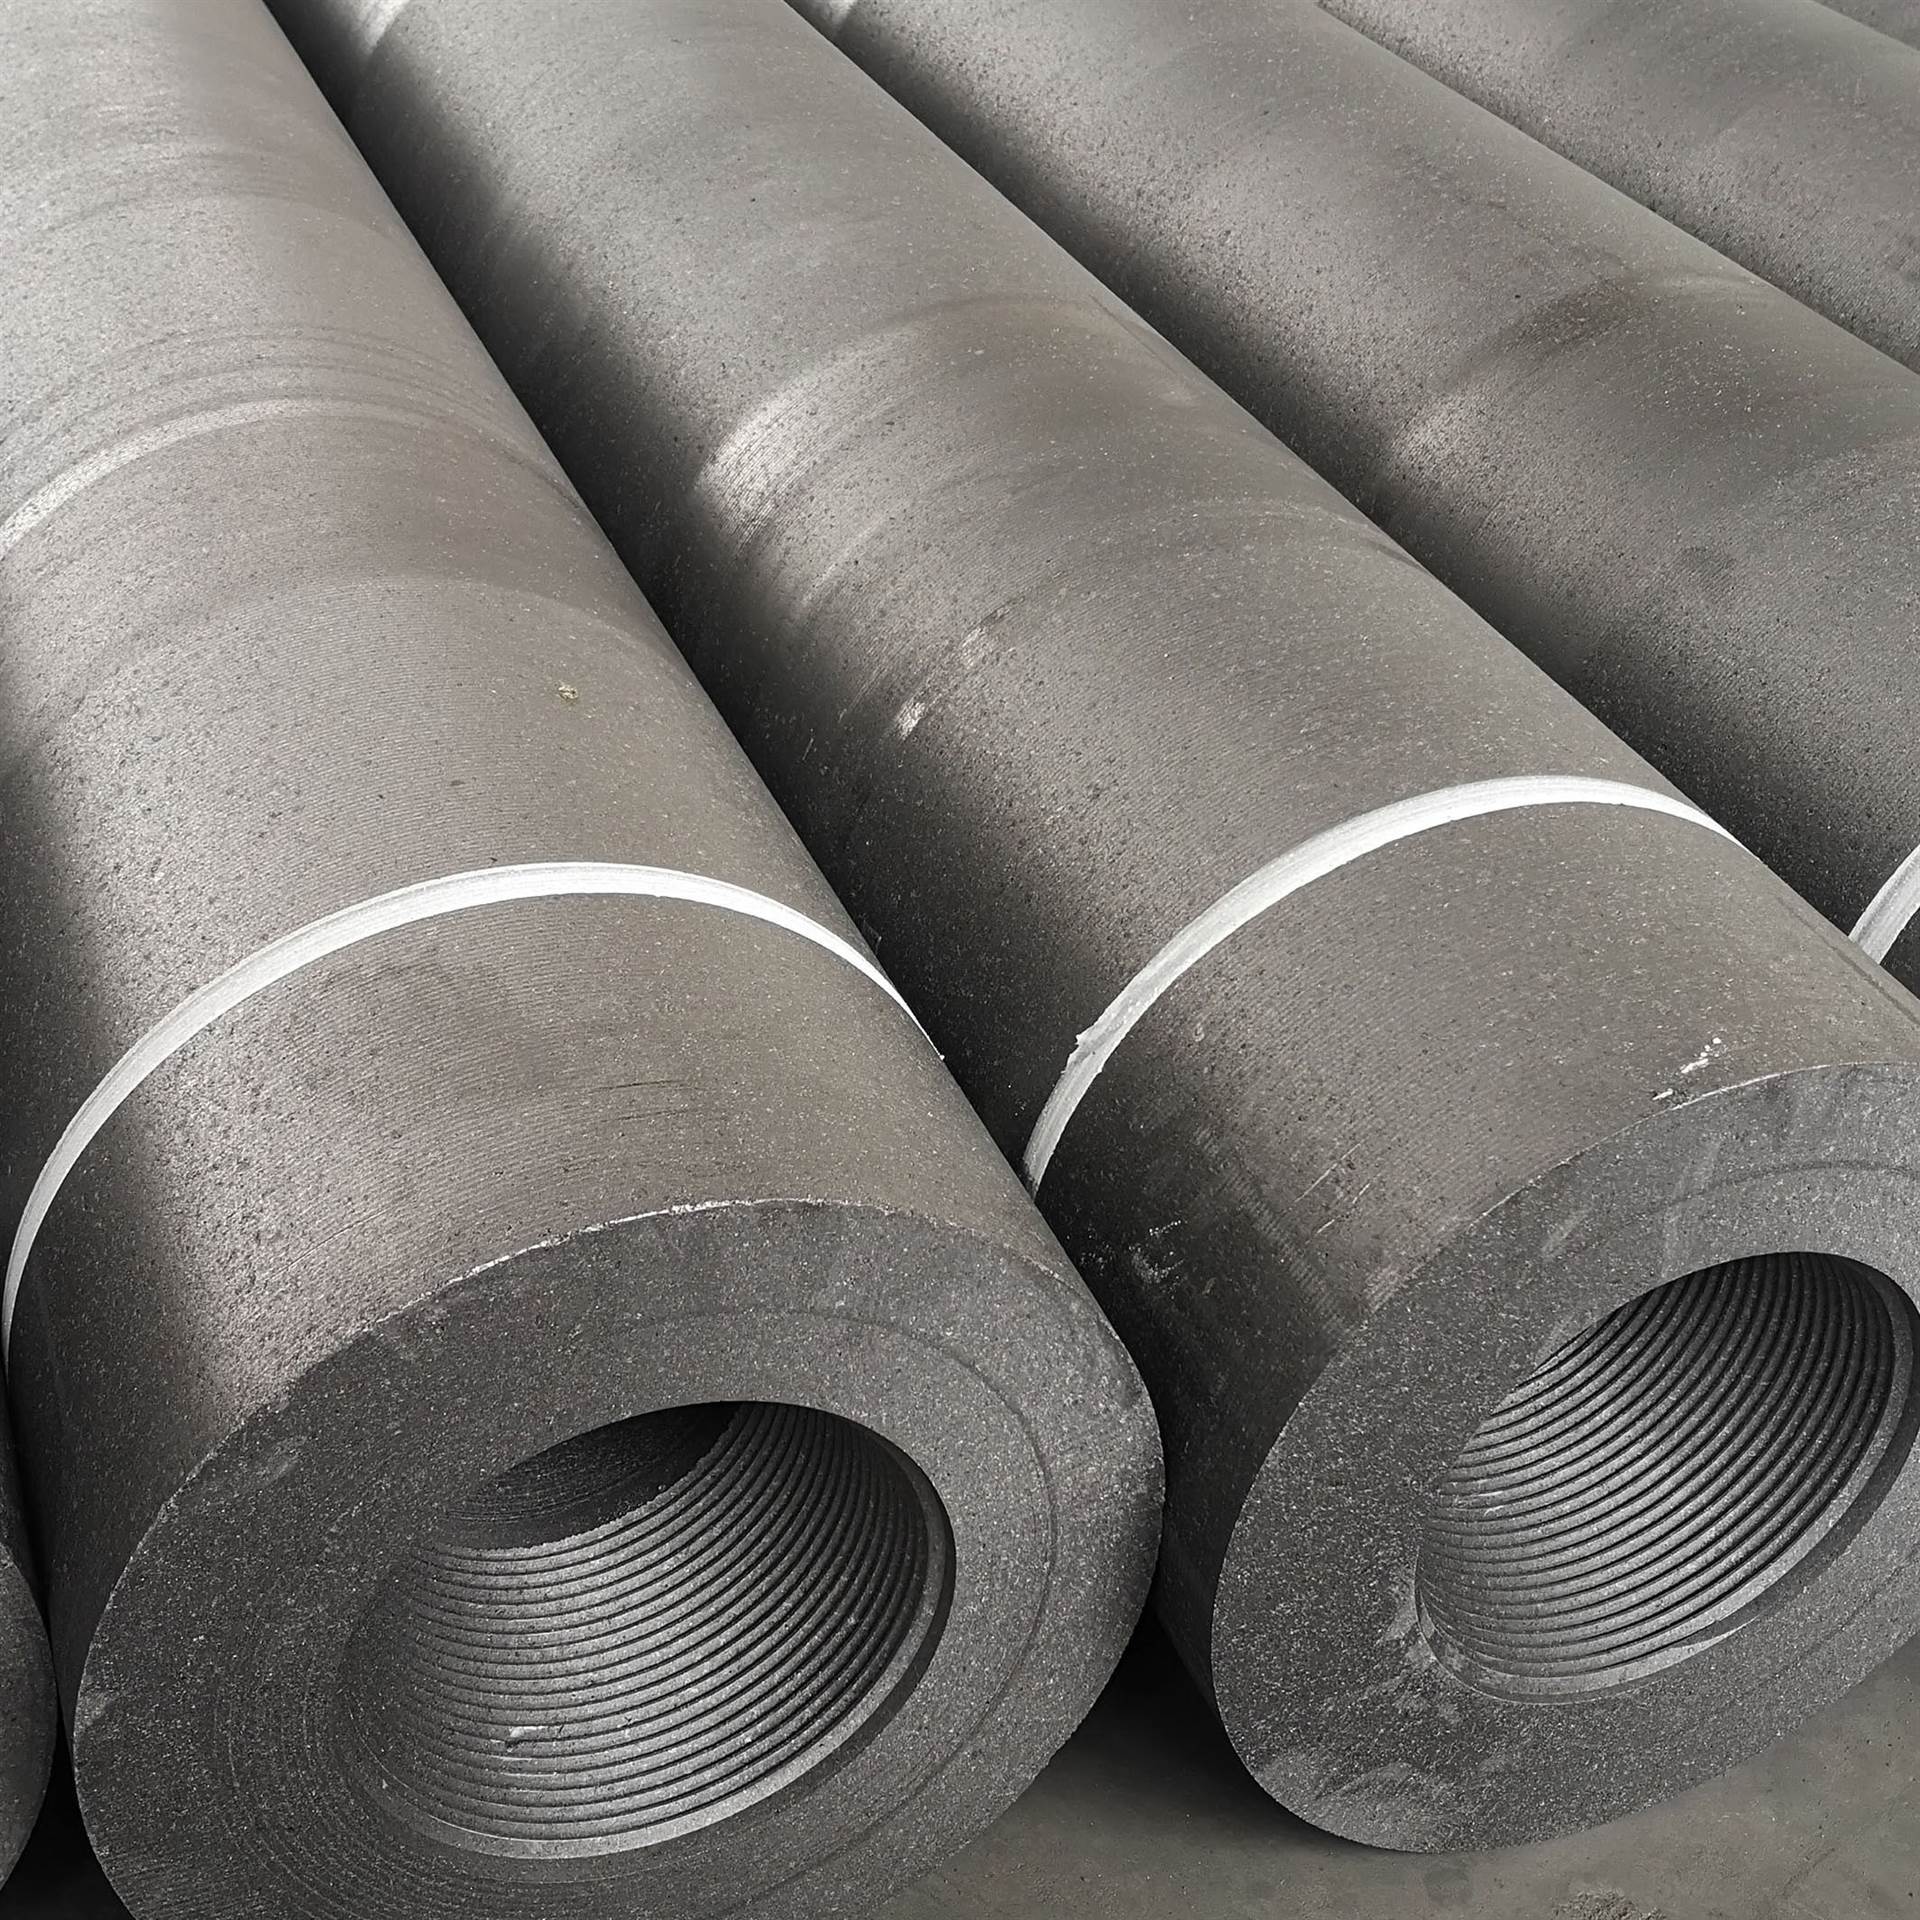 How to optimize the production efficiency of graphite electrode